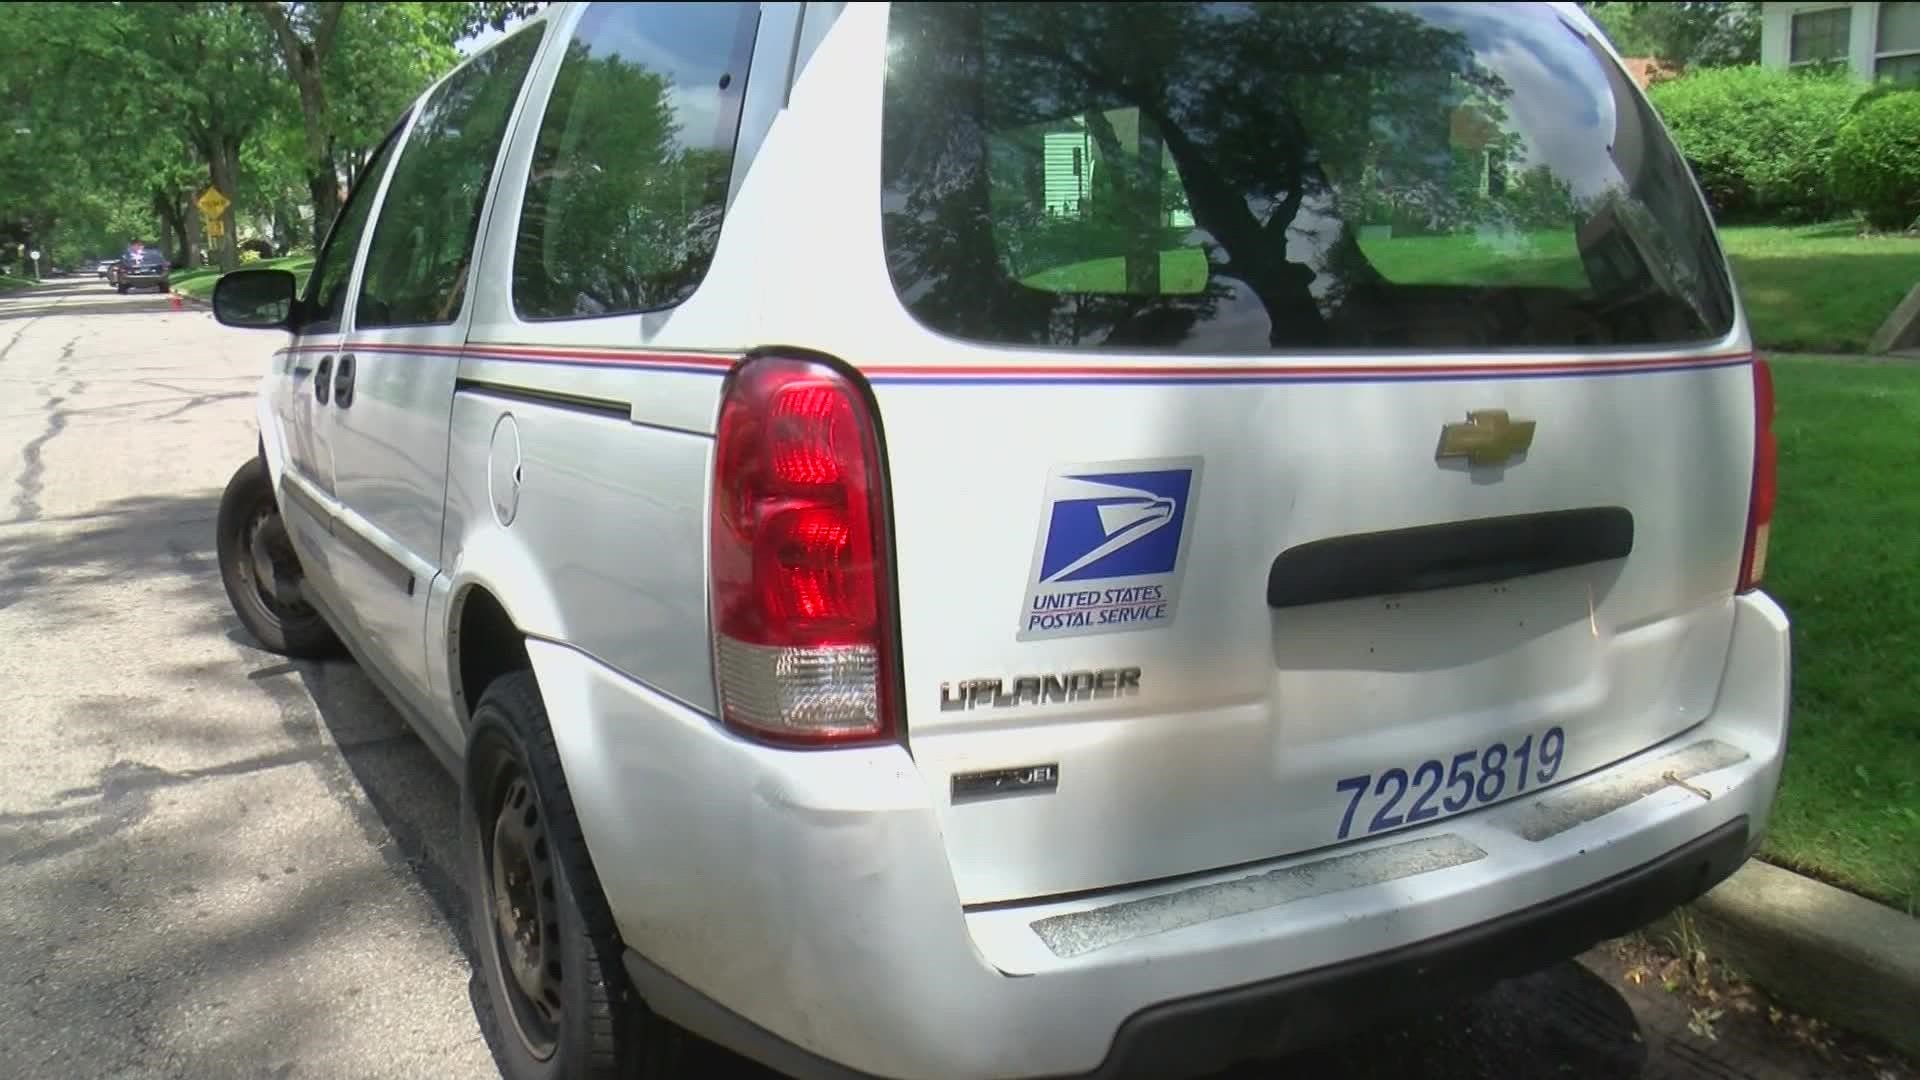 A 68-year-old mail carrier told officers a man in a black ski mask pulled a gun on him while the victim was sitting in his mail truck in west Toledo.